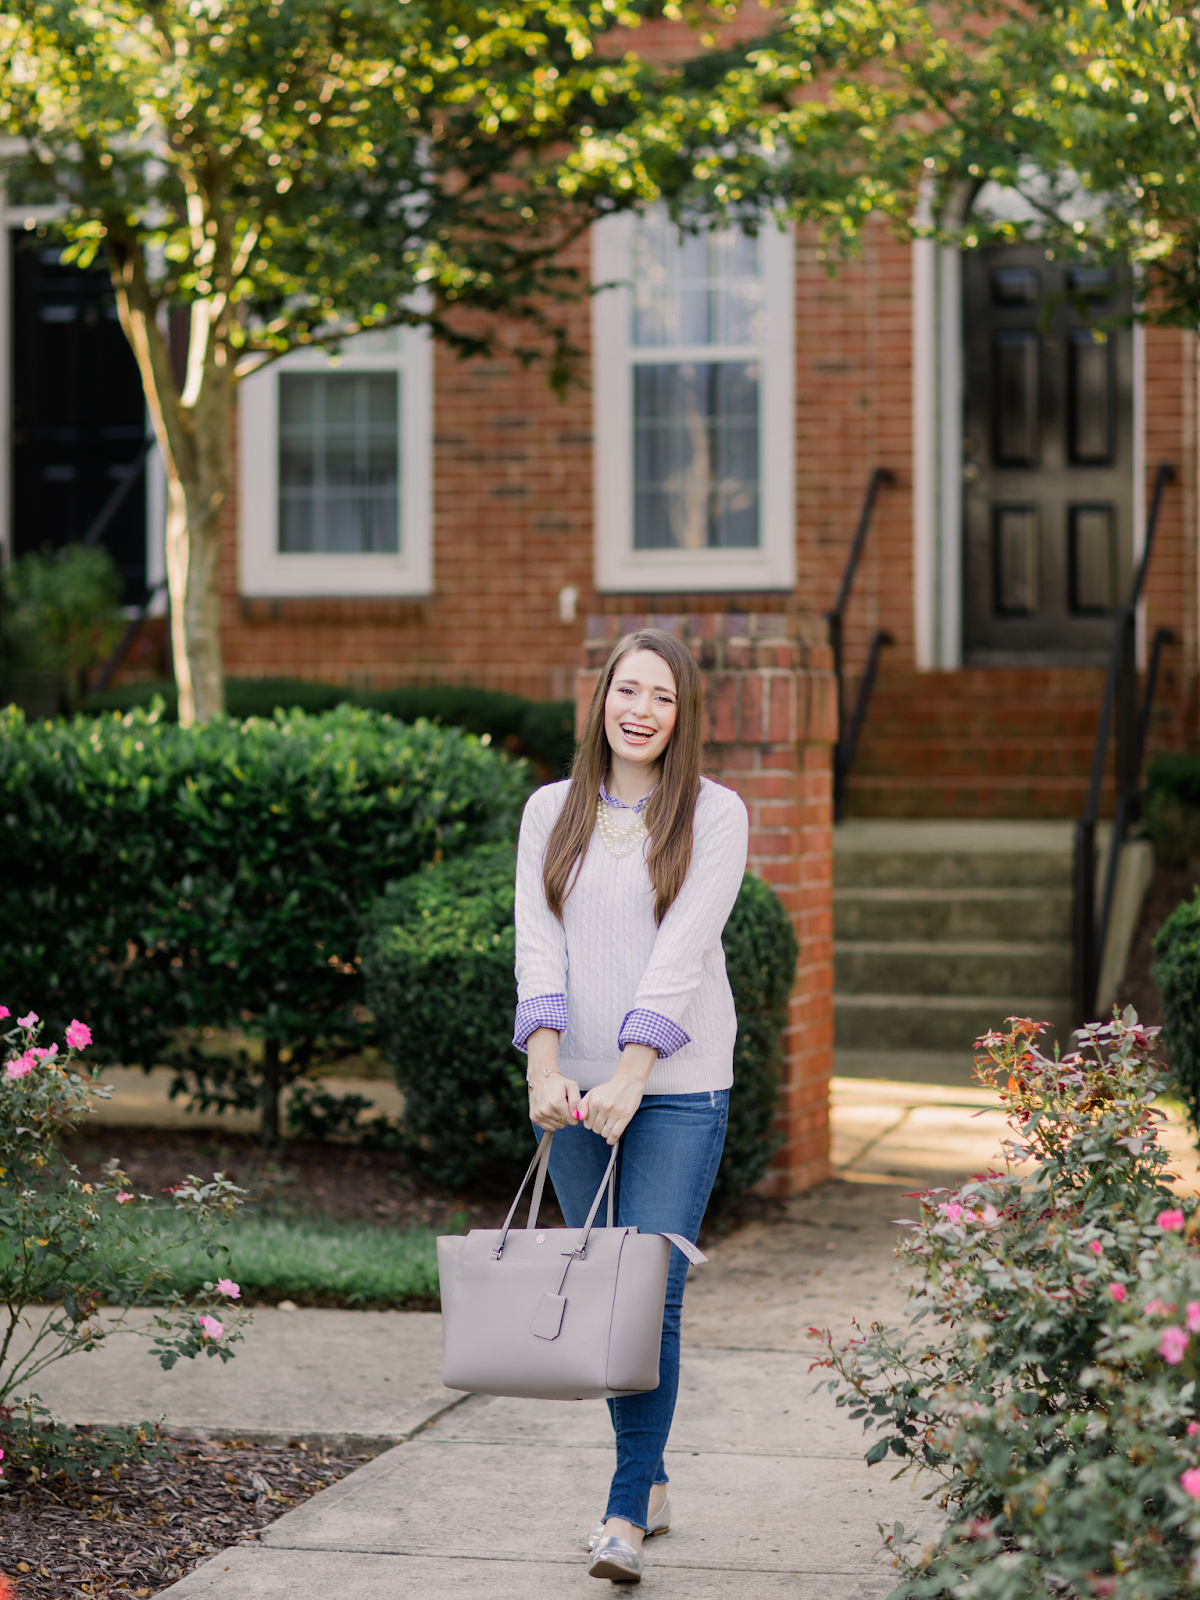 Designer Diaries: Tory Burch Parker Tote Review. | Southern Belle in  Training